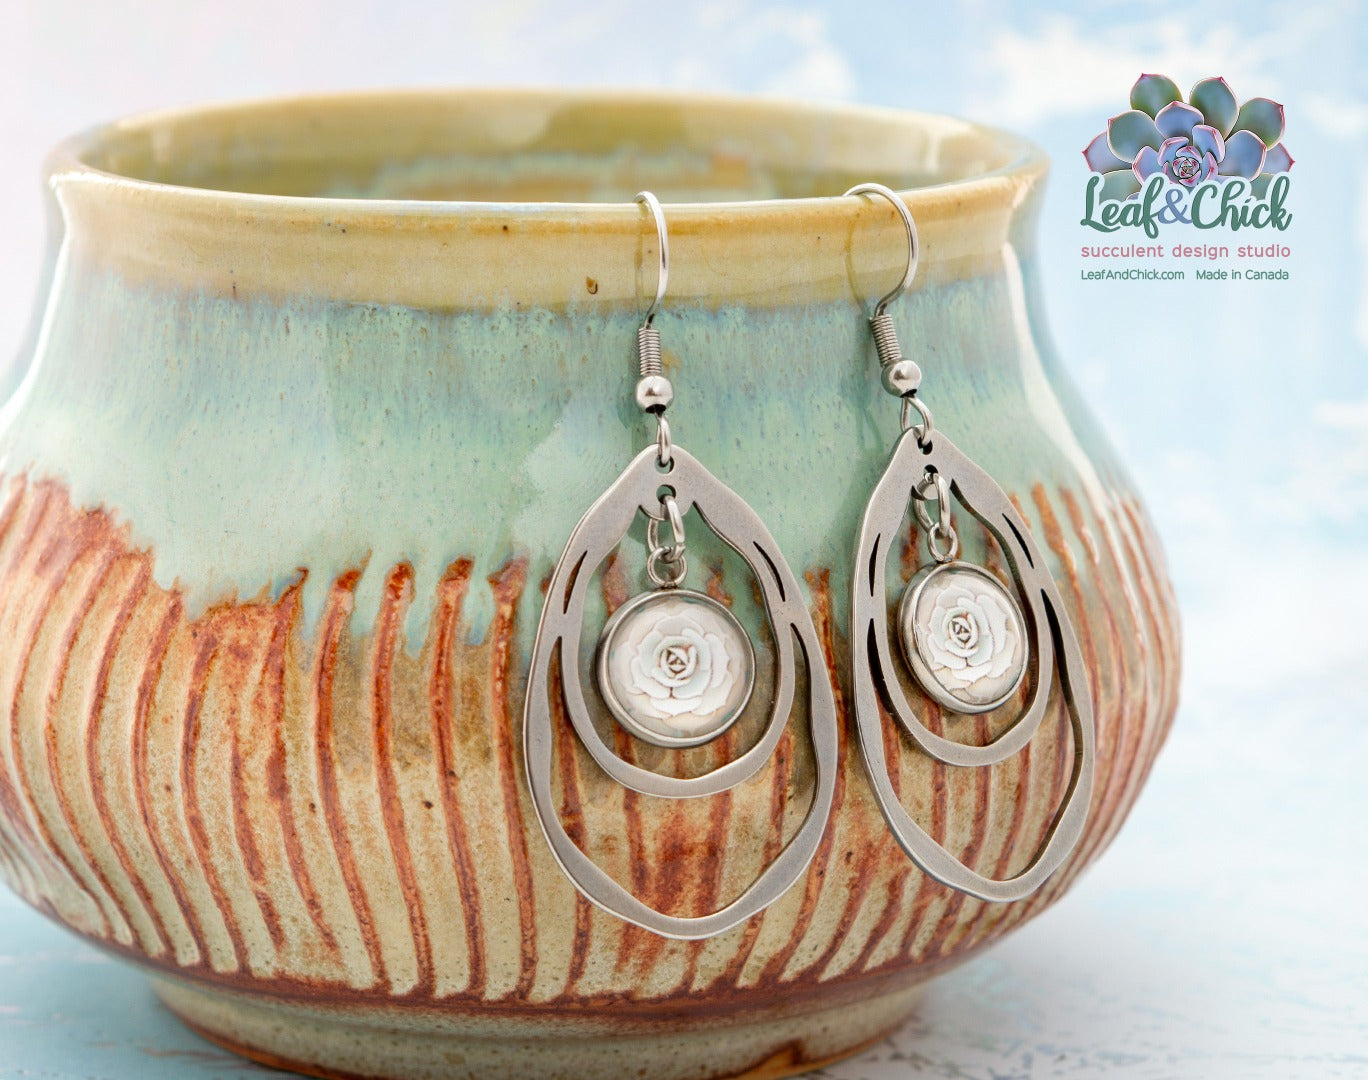 large stainless steel earrings hanging off the side of a bowl